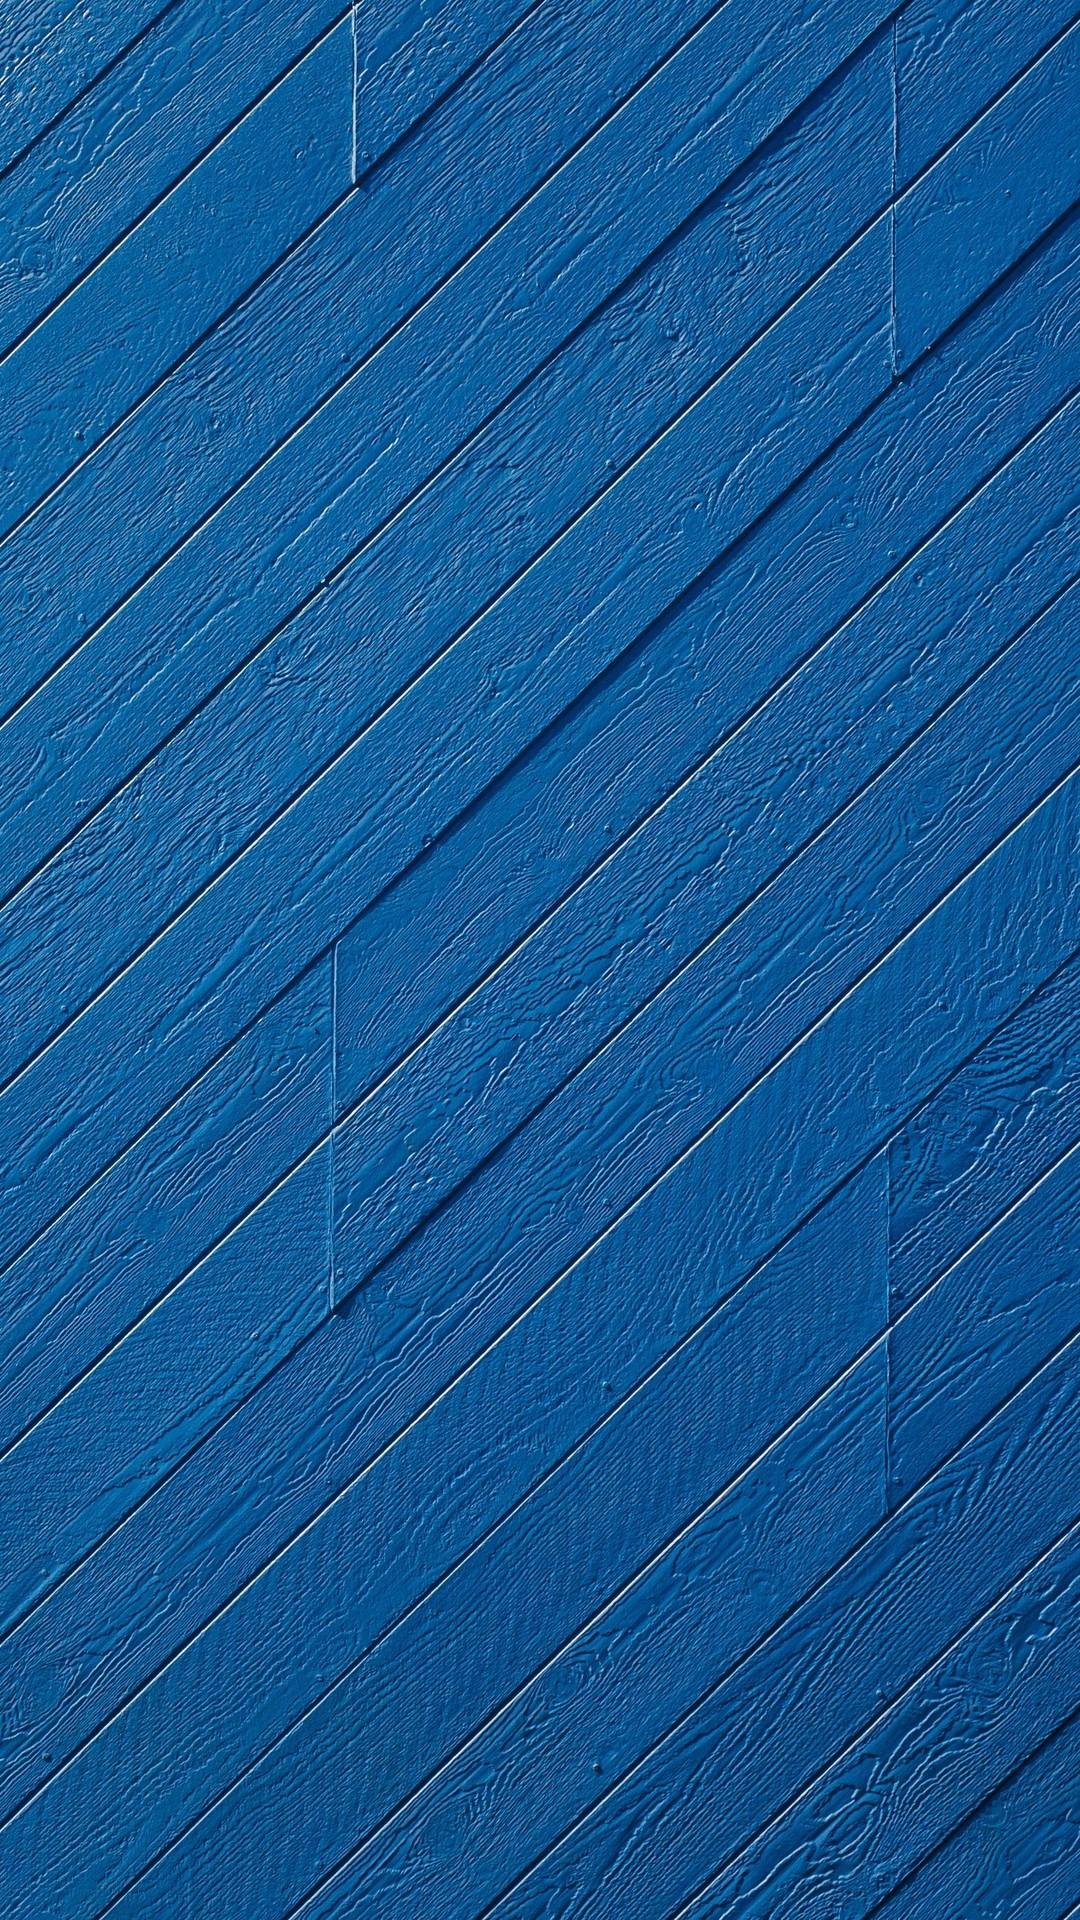 Blue Wood Pattern 4k Mobile Wallpaper iPhone, Android